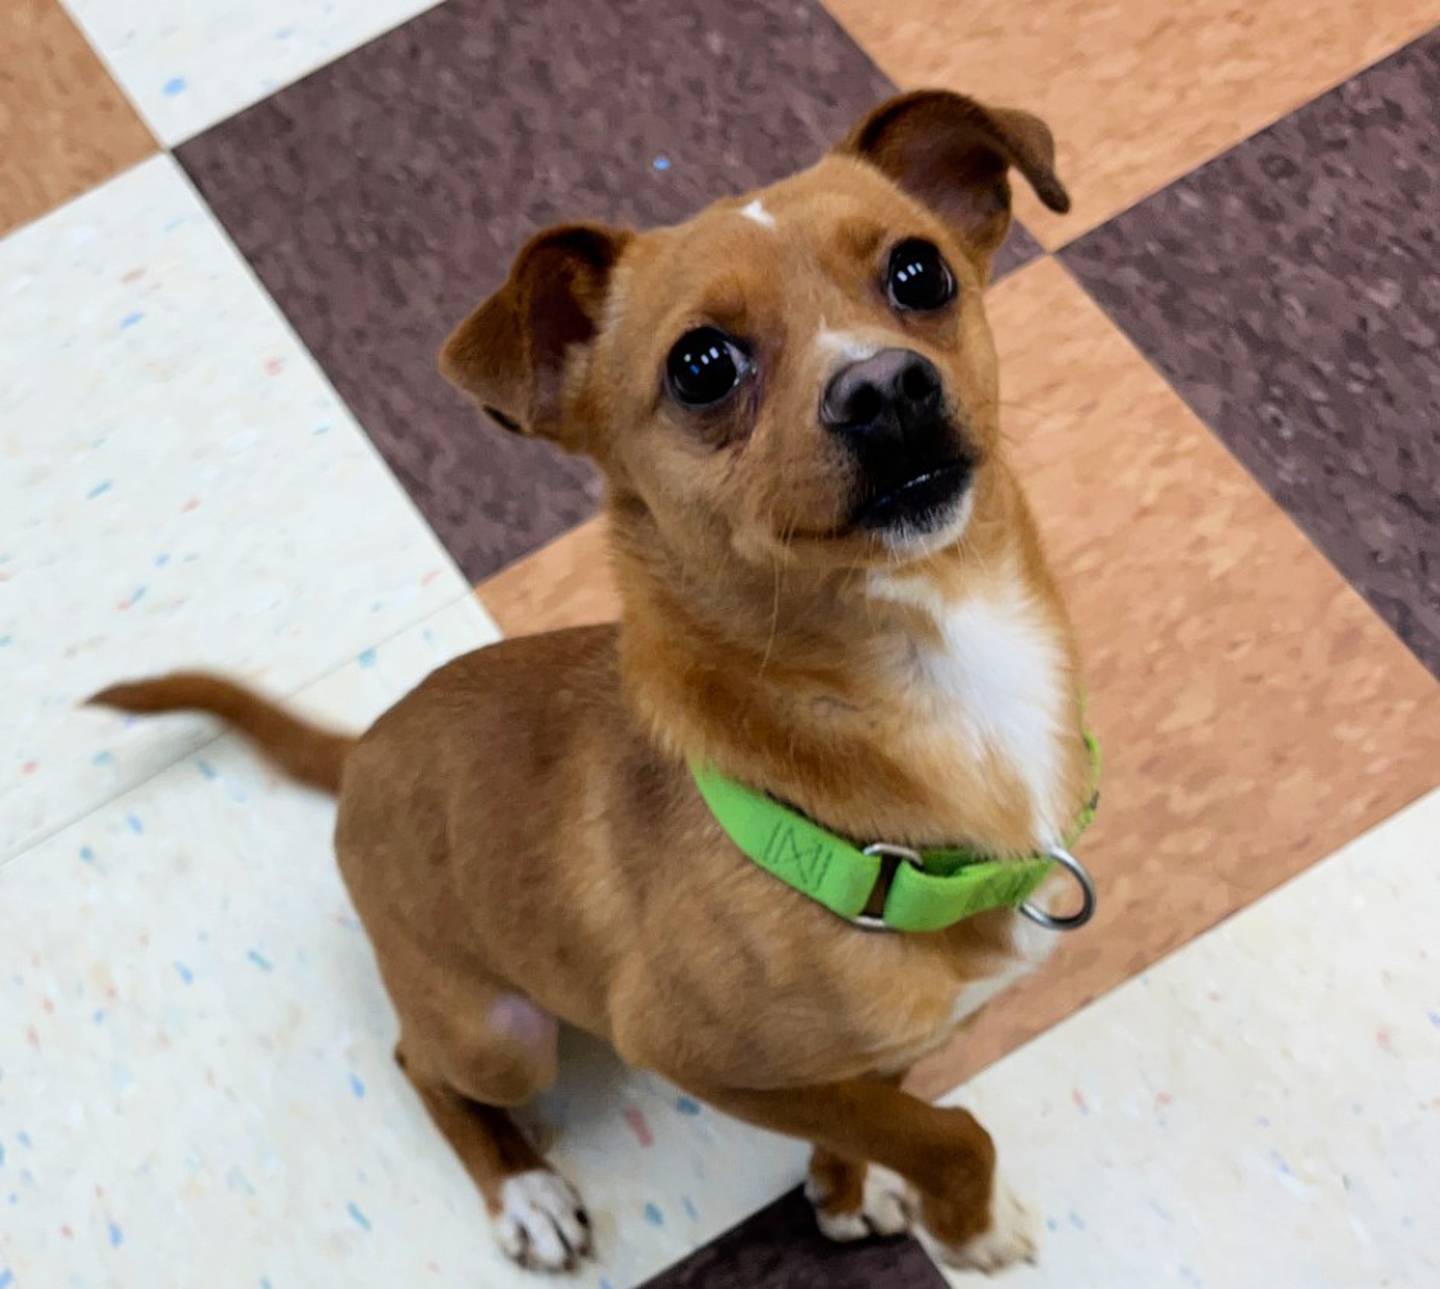 Linus is a spunky, 2-year-old Chihuahua who loves other dogs and does well with kids. Linus loves to climb onto laps and soak up attention and love. To meet Linus, call Joliet Township Animal Control at 815-725-0333.